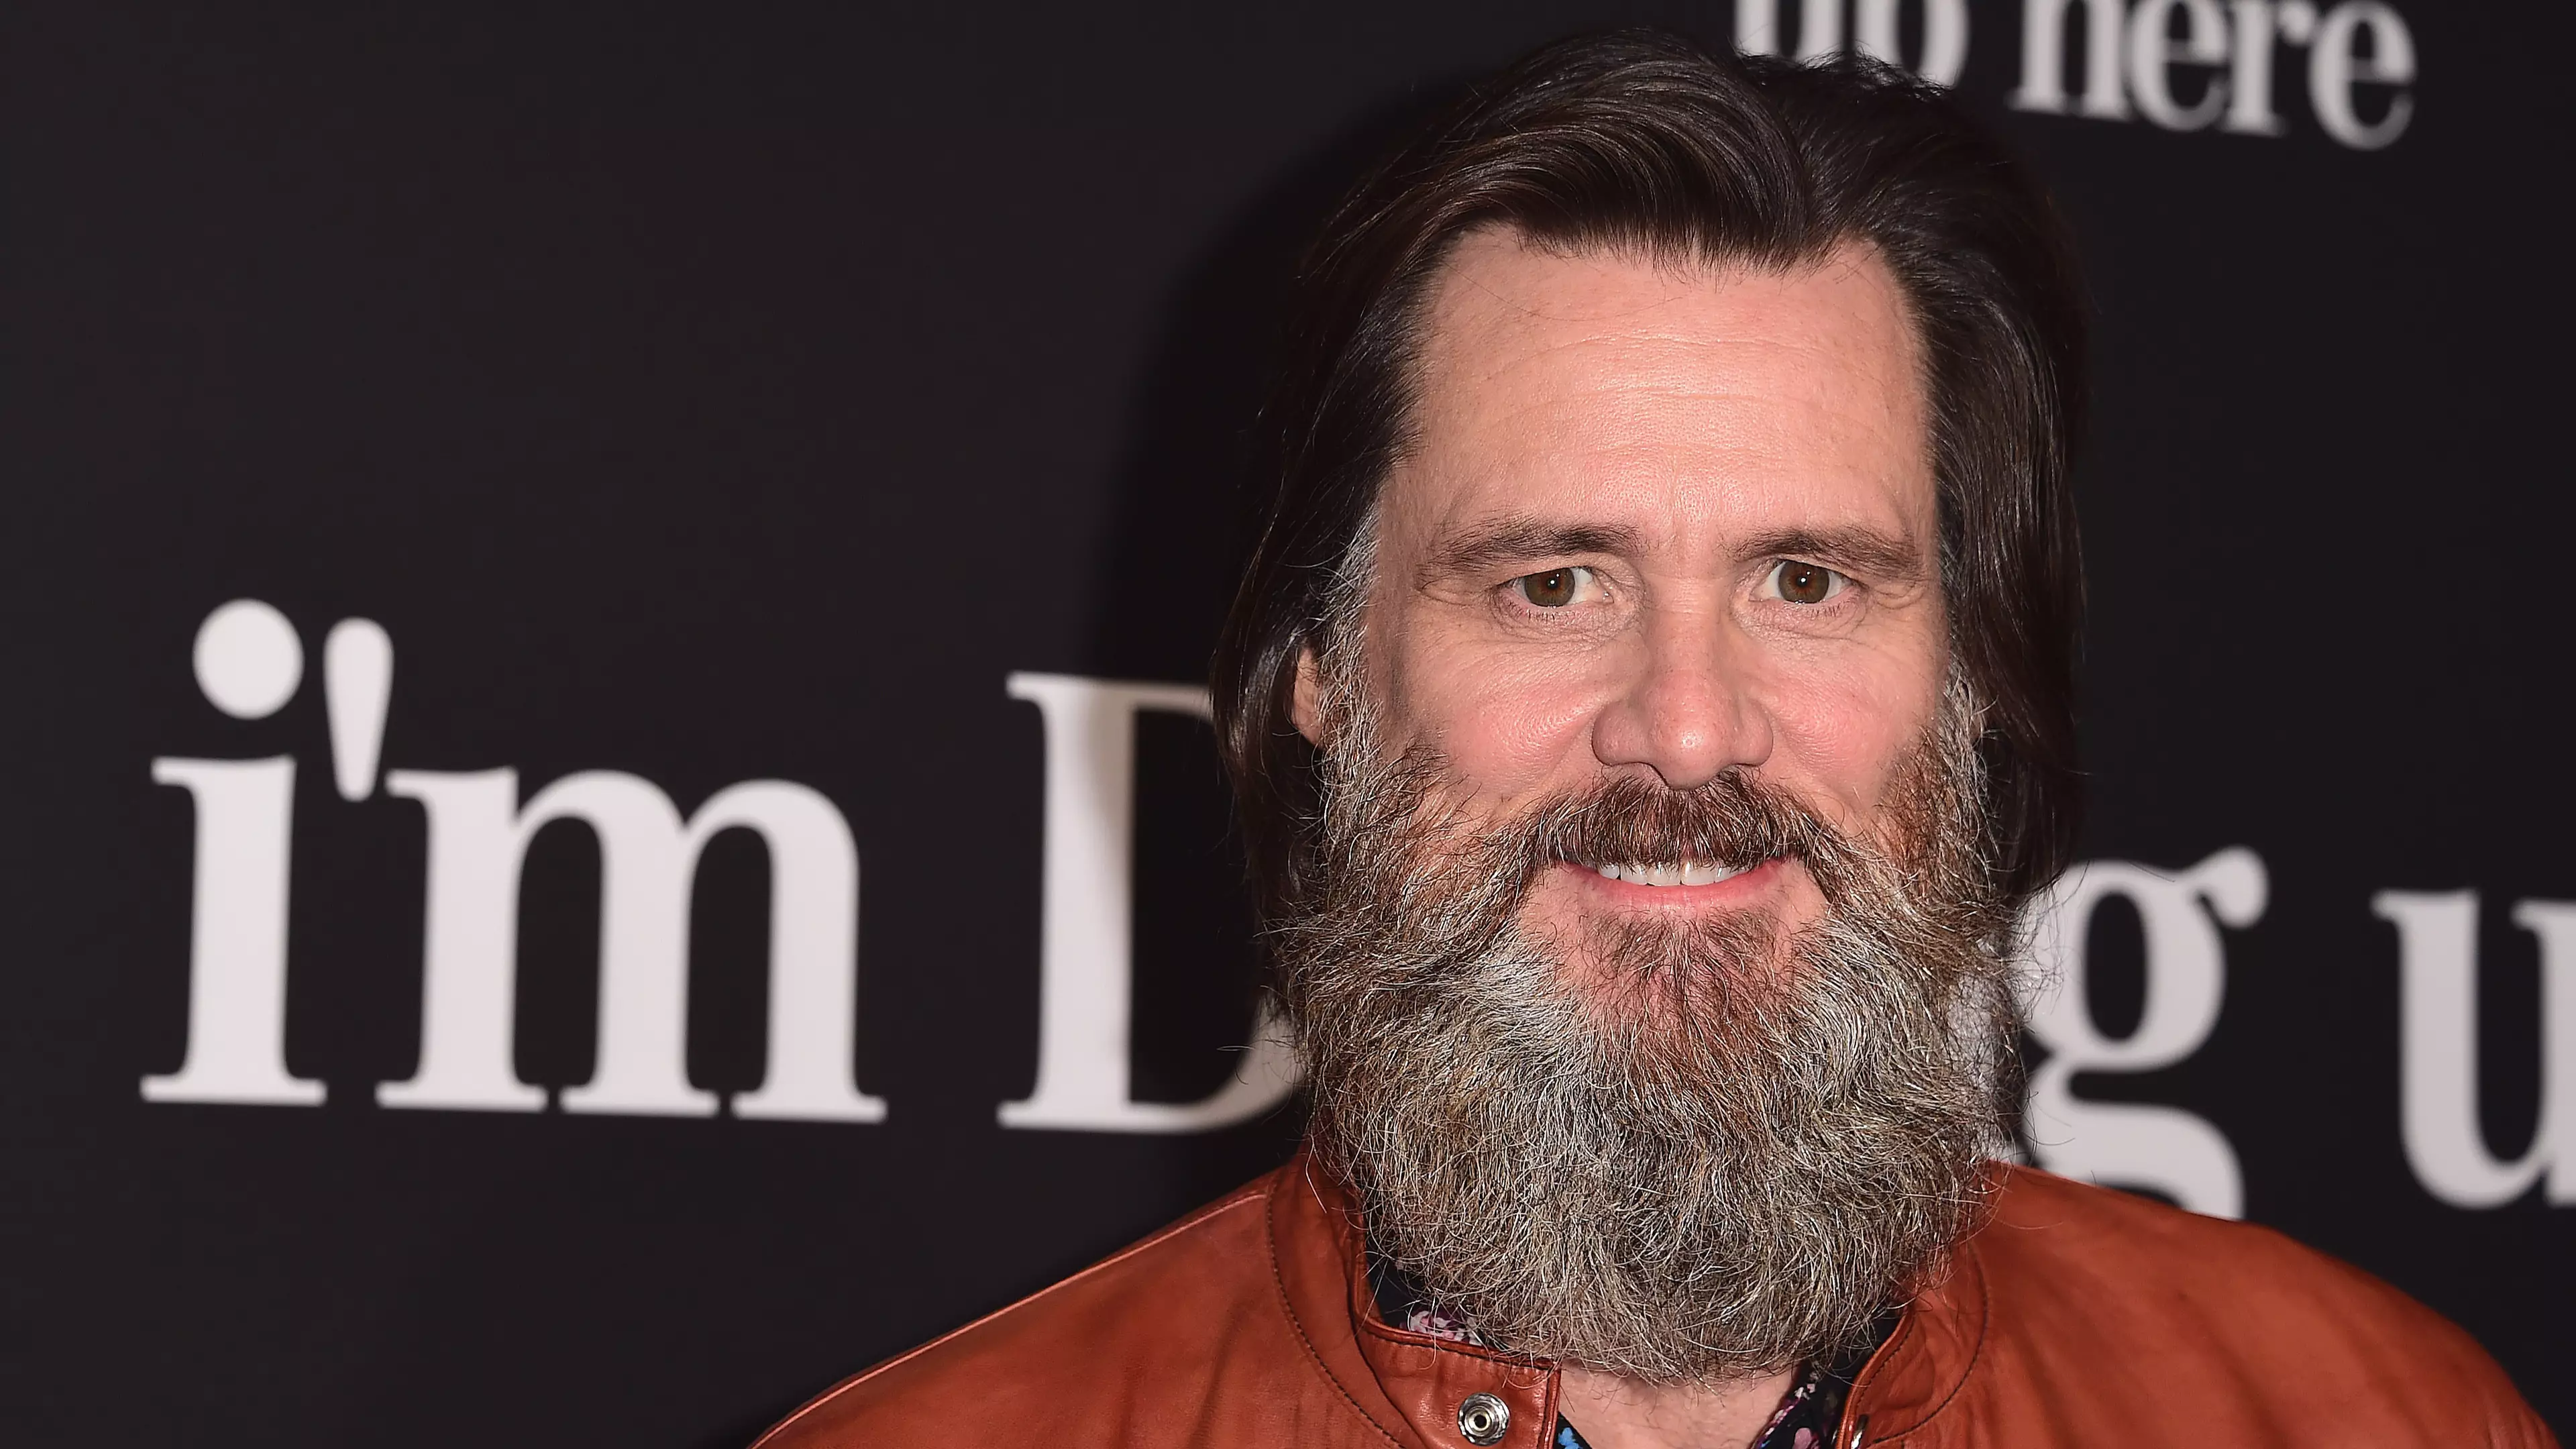 Jim Carrey Will Face Wrongful Death Trial Over Ex-Girlfriend's Suicide